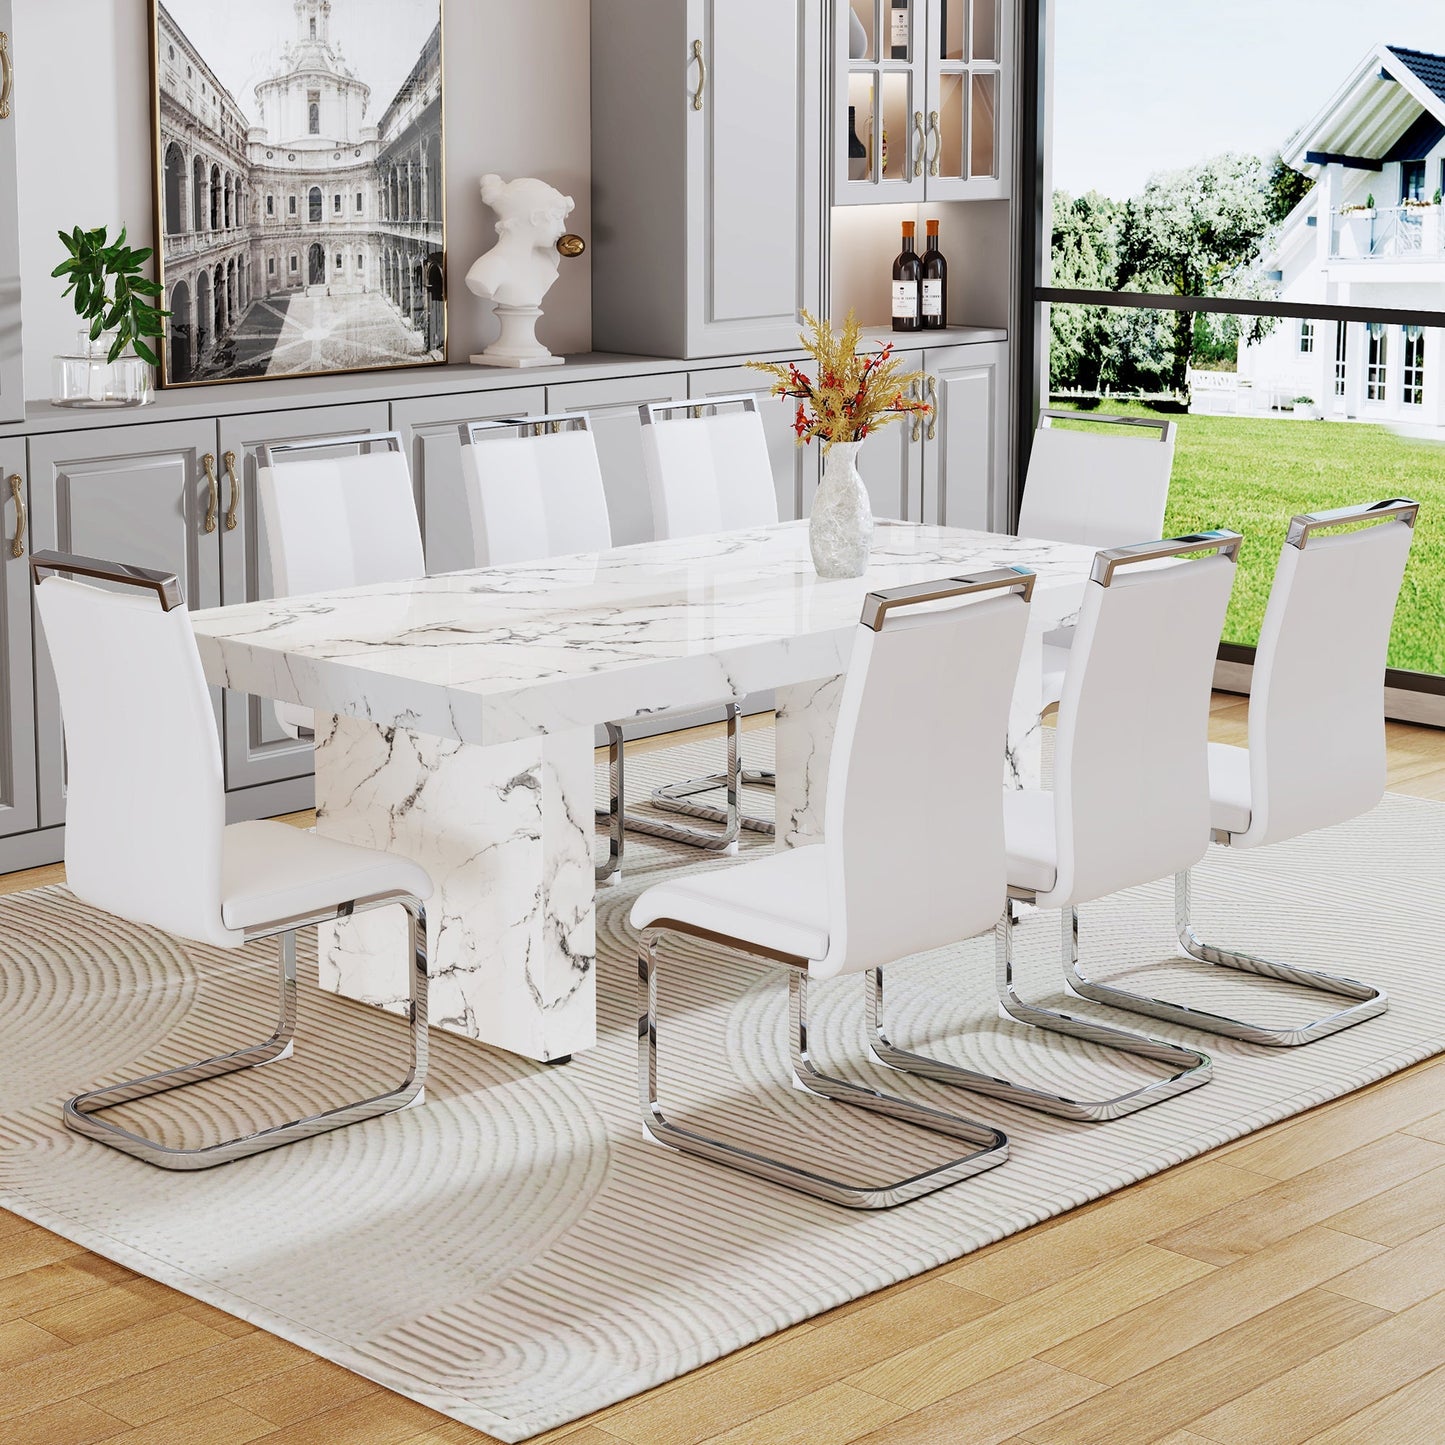 Modern rectangular dining table, office desk. MDF material. The white kitchen dining table has patterns and is suitable for 8-10 people.